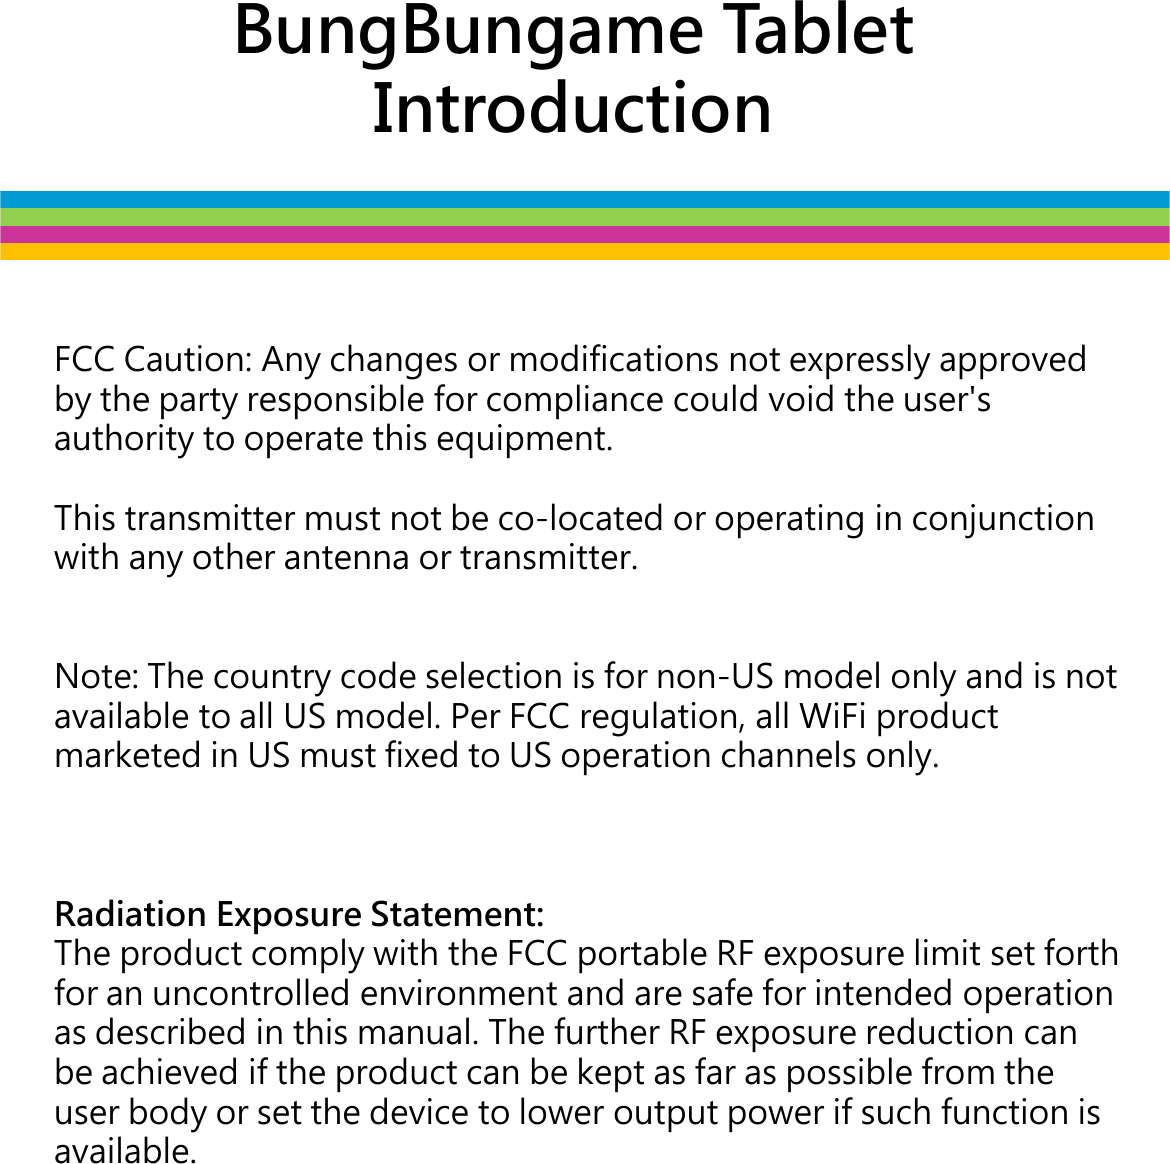 BungBungame Tablet IntroductionFCC Caution: Any changes or modifications not expressly approved by the party responsible for compliance could void the user&apos;s authority to operate this equipment.This transmitter must not be co-located or operating in conjunction This transmitter must not be co-located or operating in conjunction with any other antenna or transmitter.Note: The country code selection is for non-US model only and is not available to all US model. Per FCC regulation, all WiFi product marketed in US must fixed to US operation channels only.Radiation Exposure Statement:The product comply with the FCC portable RF exposure limit set forth for an uncontrolled environment and are safe for intended operation as described in this manual. The further RF exposure reduction can be achieved if the product can be kept as far as possible from the user body or set the device to lower output power if such function is user body or set the device to lower output power if such function is available.